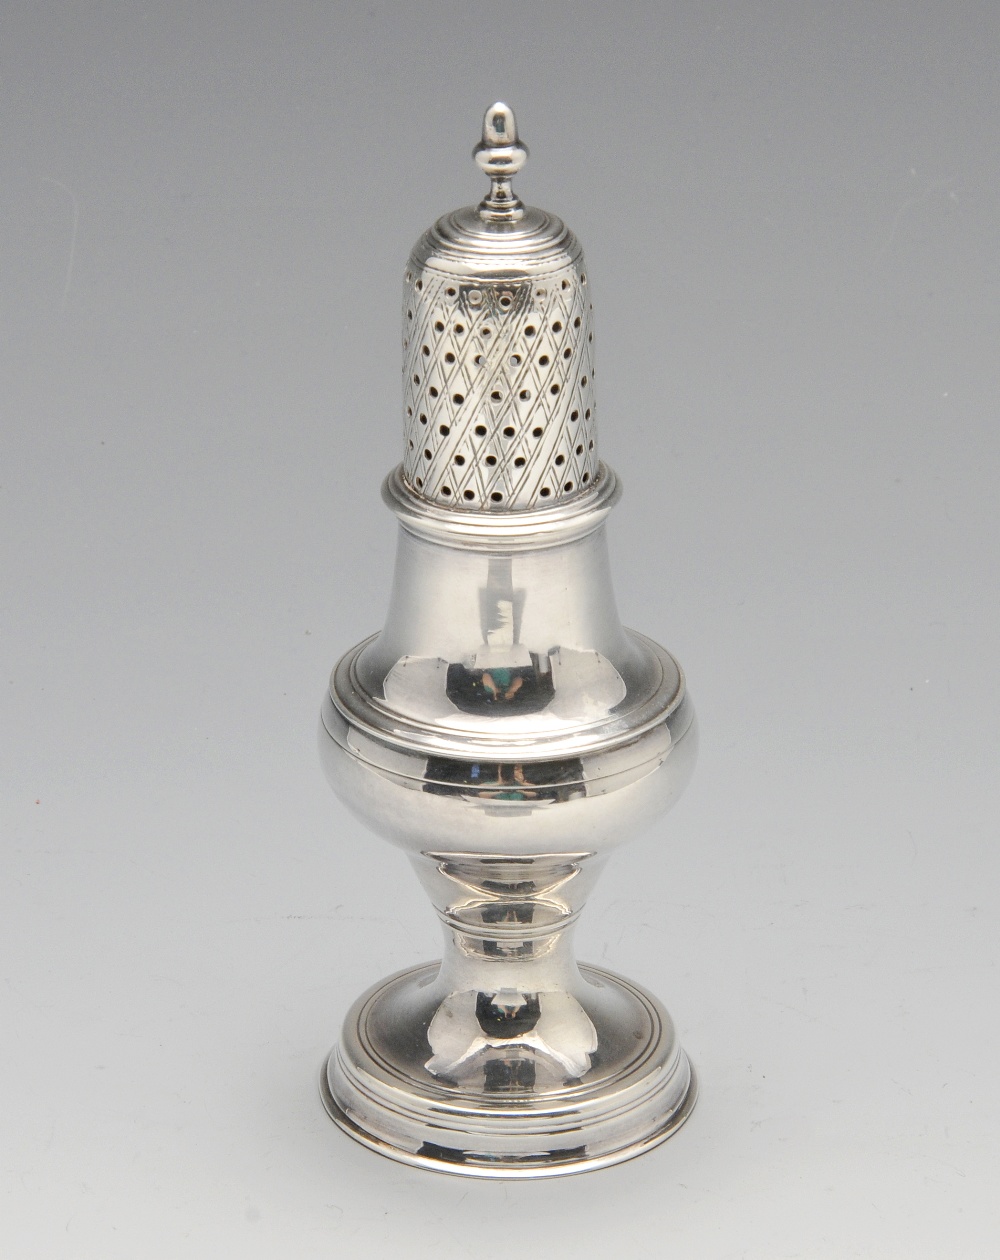 A George III silver caster of baluster form with diaper pierced cover. Hallmarked Hester Bateman,